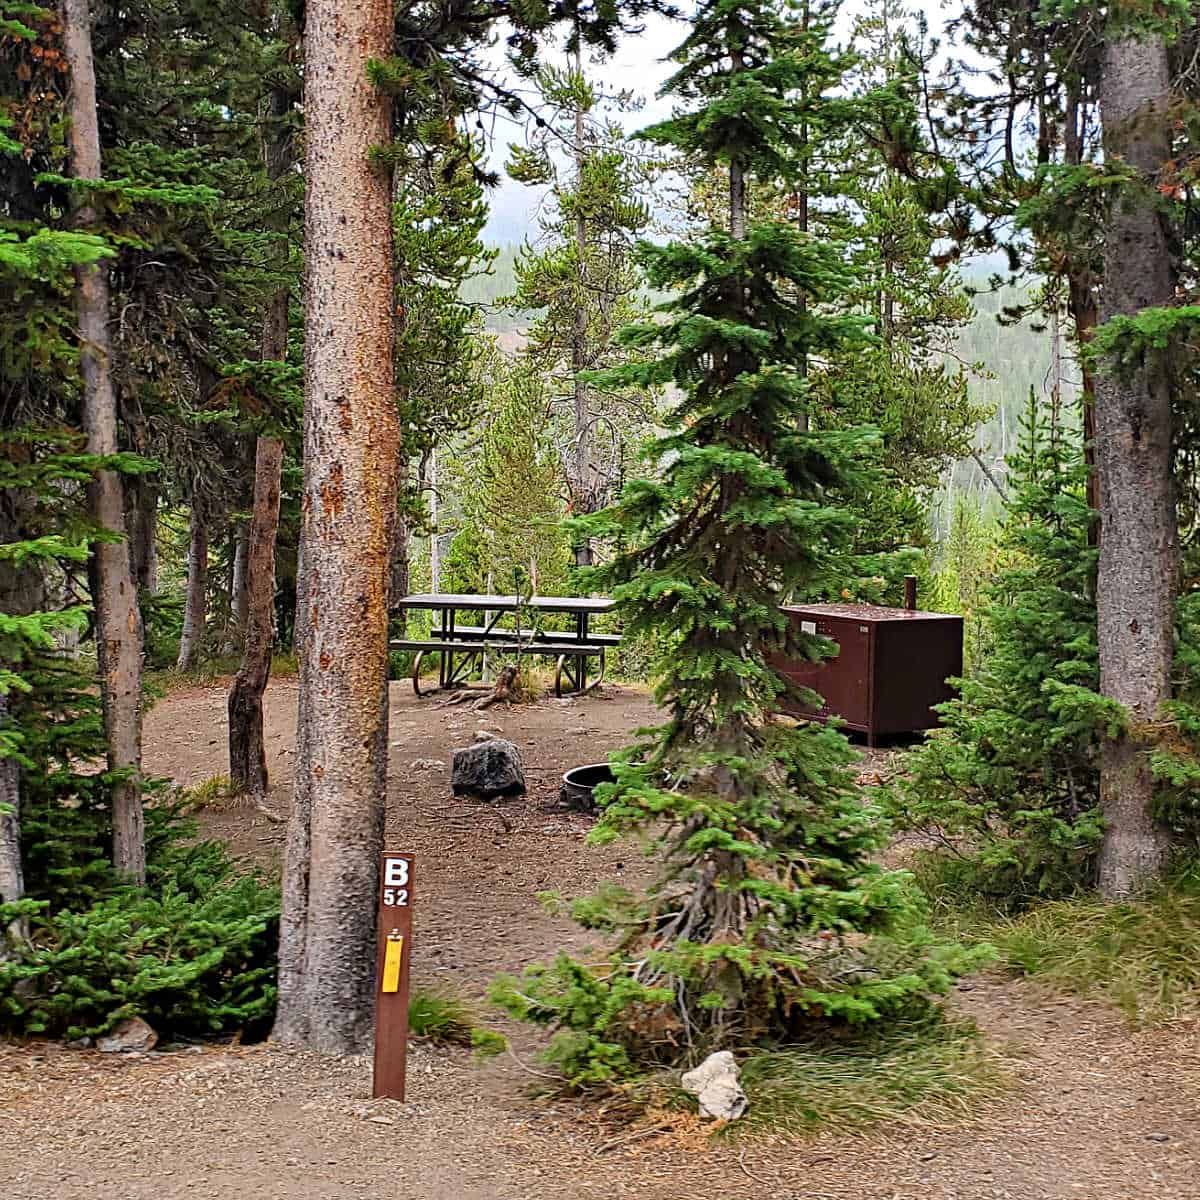 Campsite B52 Lewis Lake Campground Yellowstone National Park